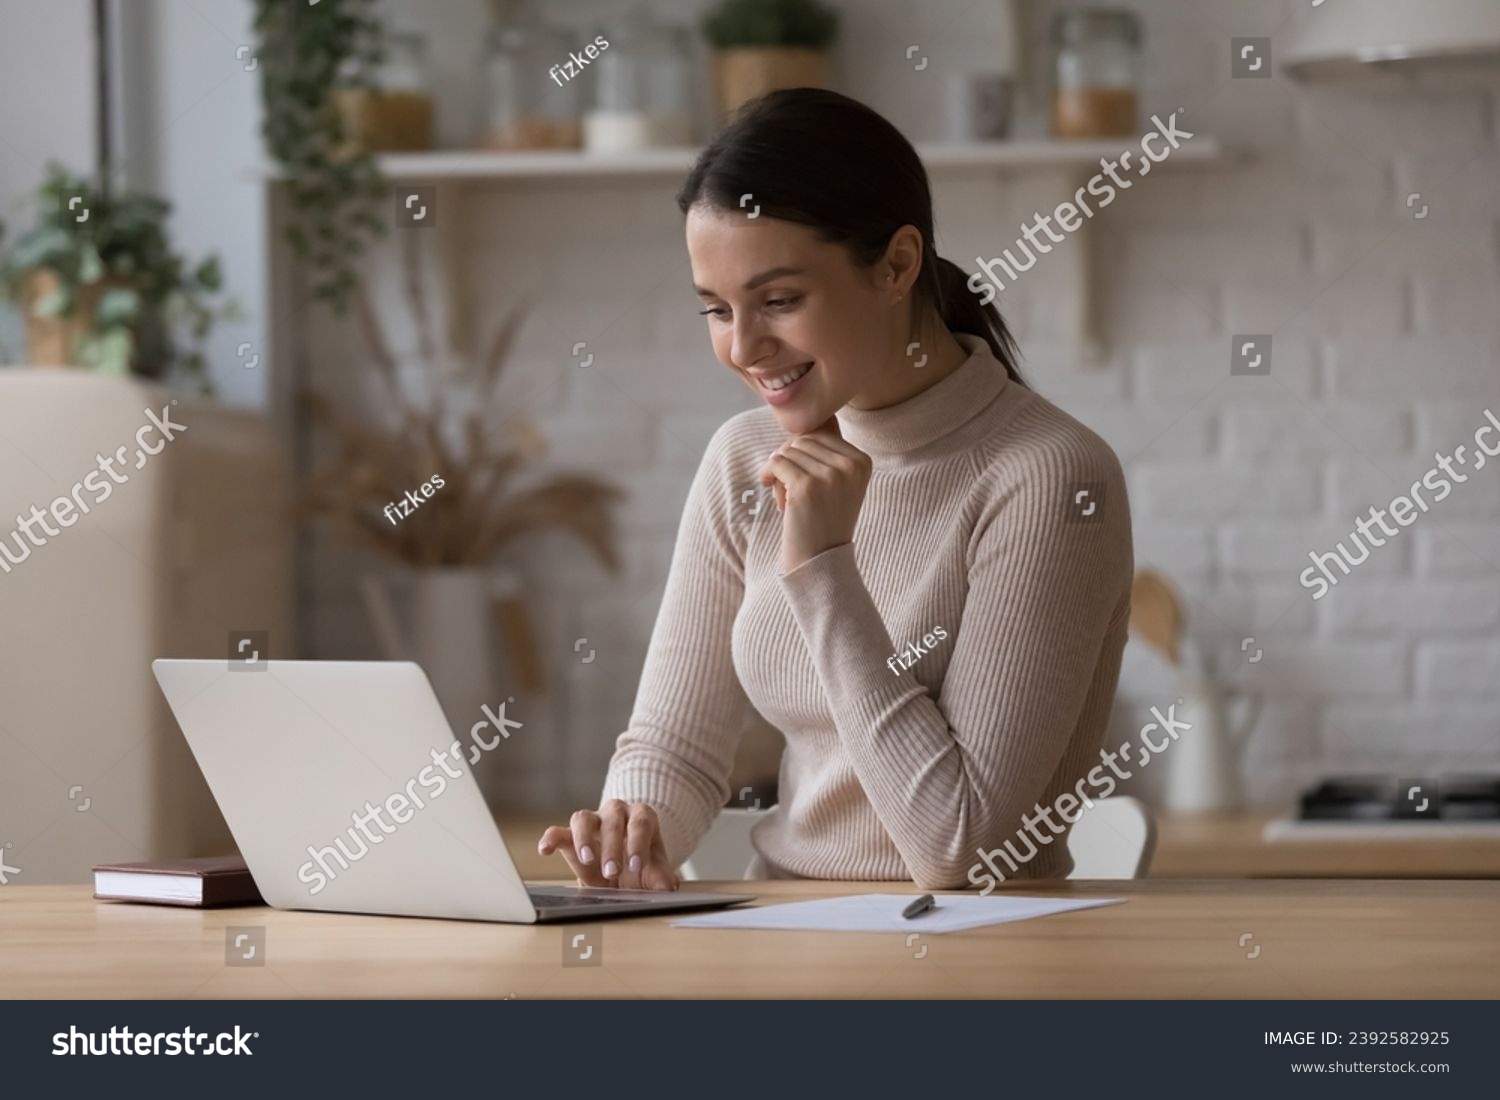 Smiling pretty woman searching information on internet, working or studying, busy in self-education, ordering goods or food on-line using laptop. E-commerce client, modern wireless tech usage concept #2392582925